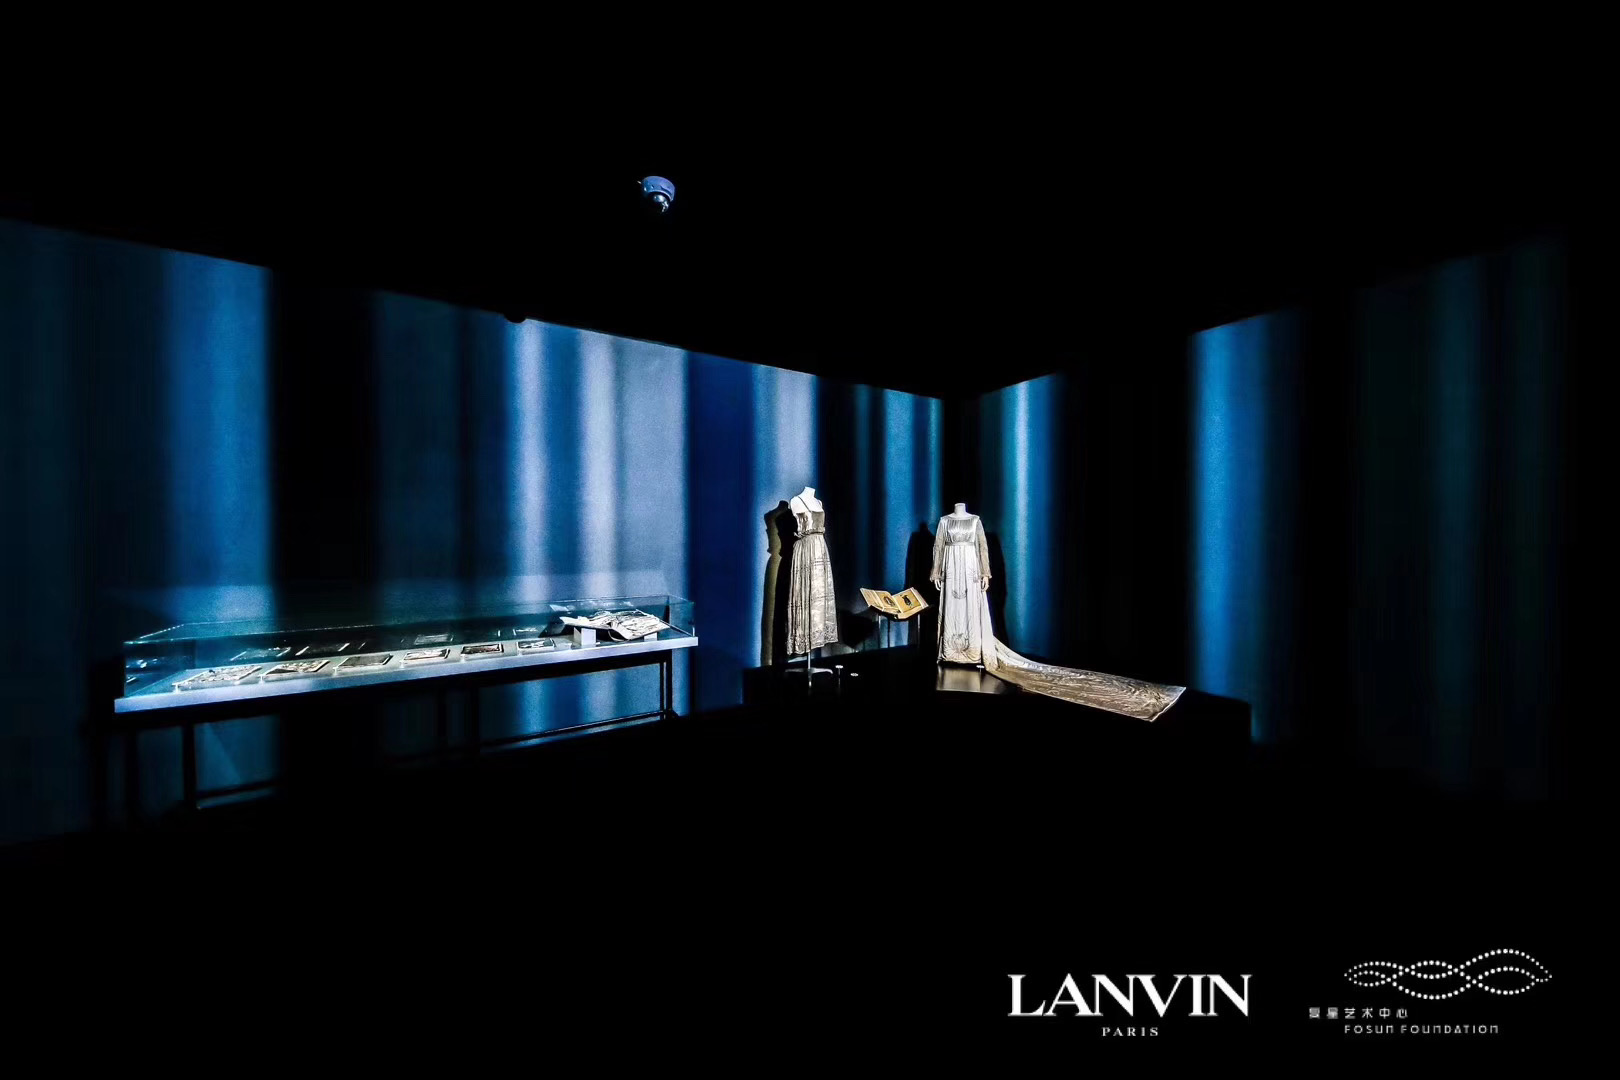 Lanvin Exhibition & Store Opening Shanghai December 6th 2019 – March 7th 2020 – 8